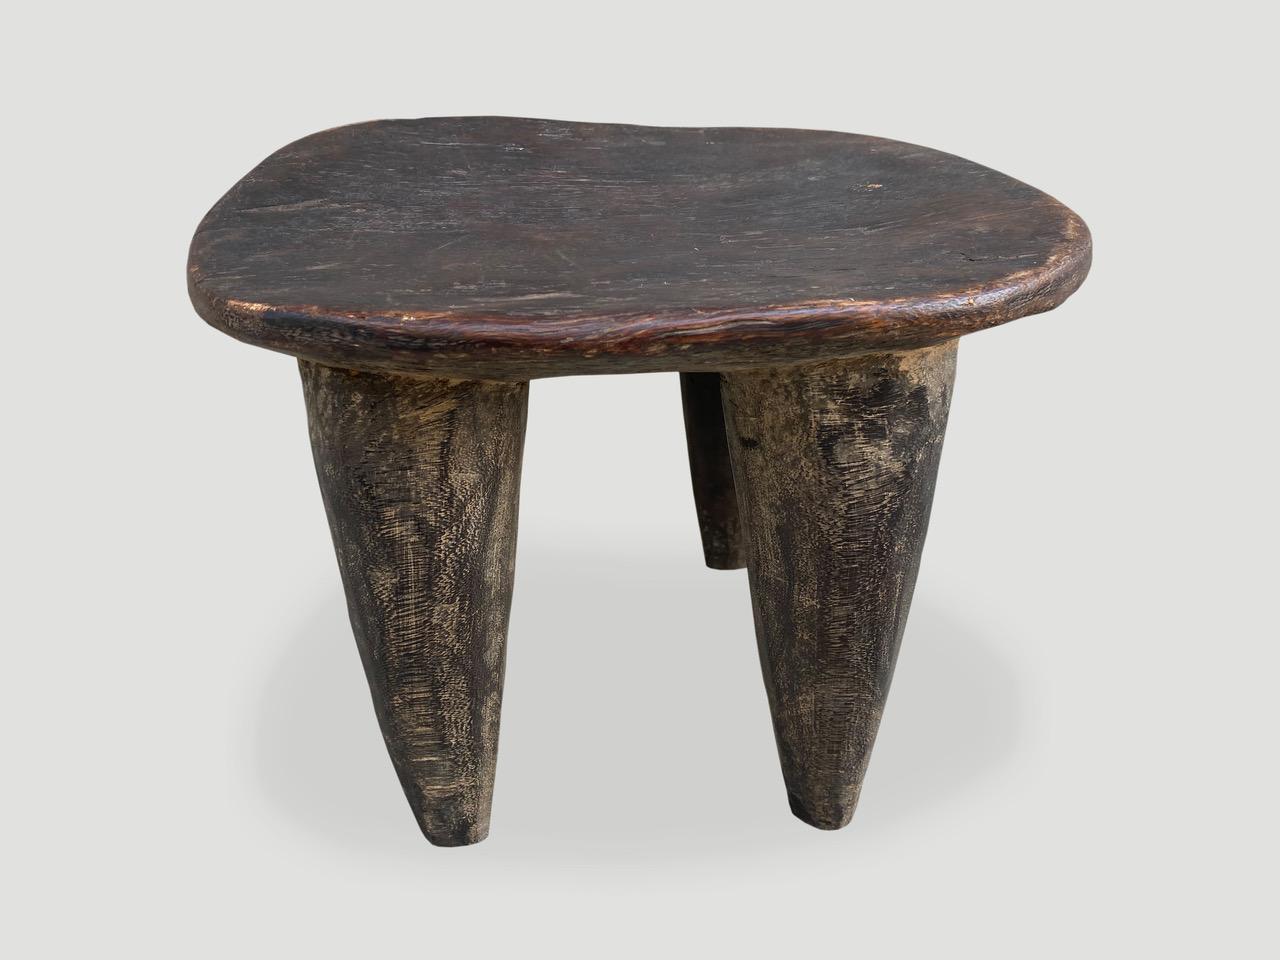 Tribal Antique African Wood Stool or Low Side Table